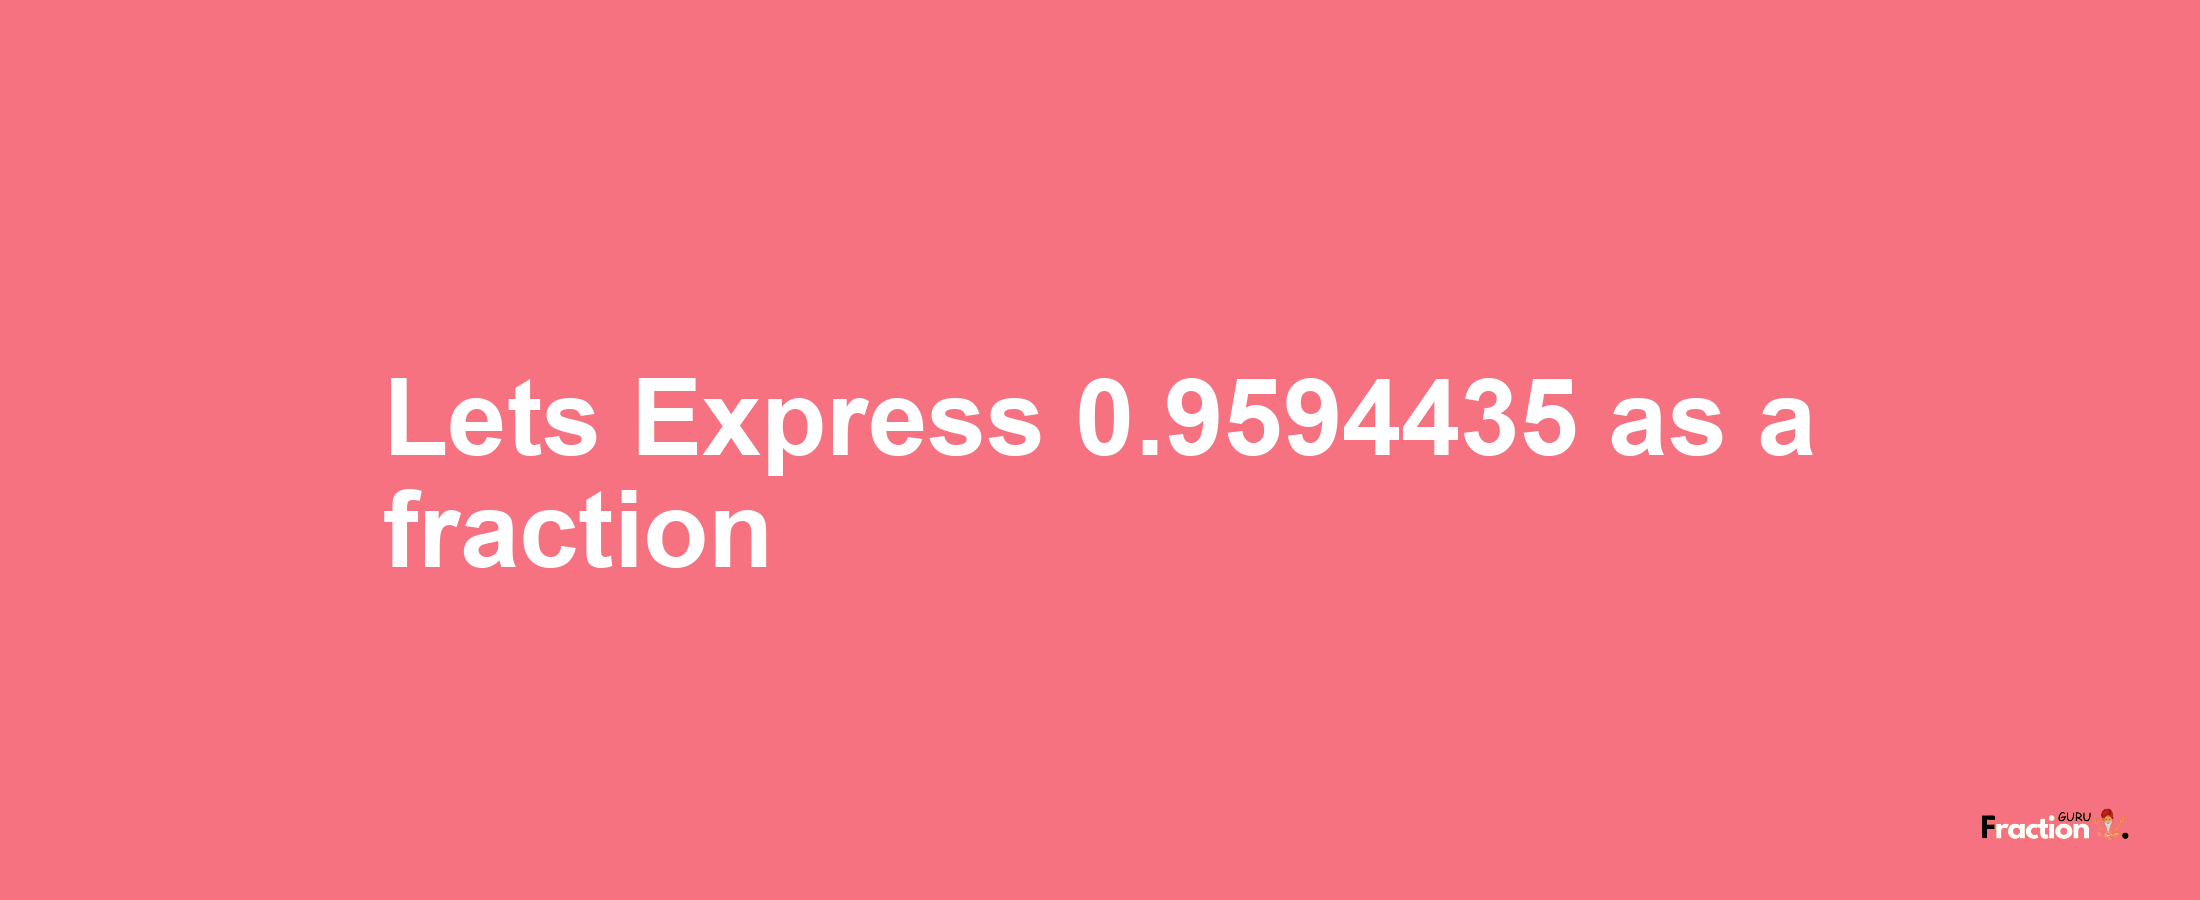 Lets Express 0.9594435 as afraction